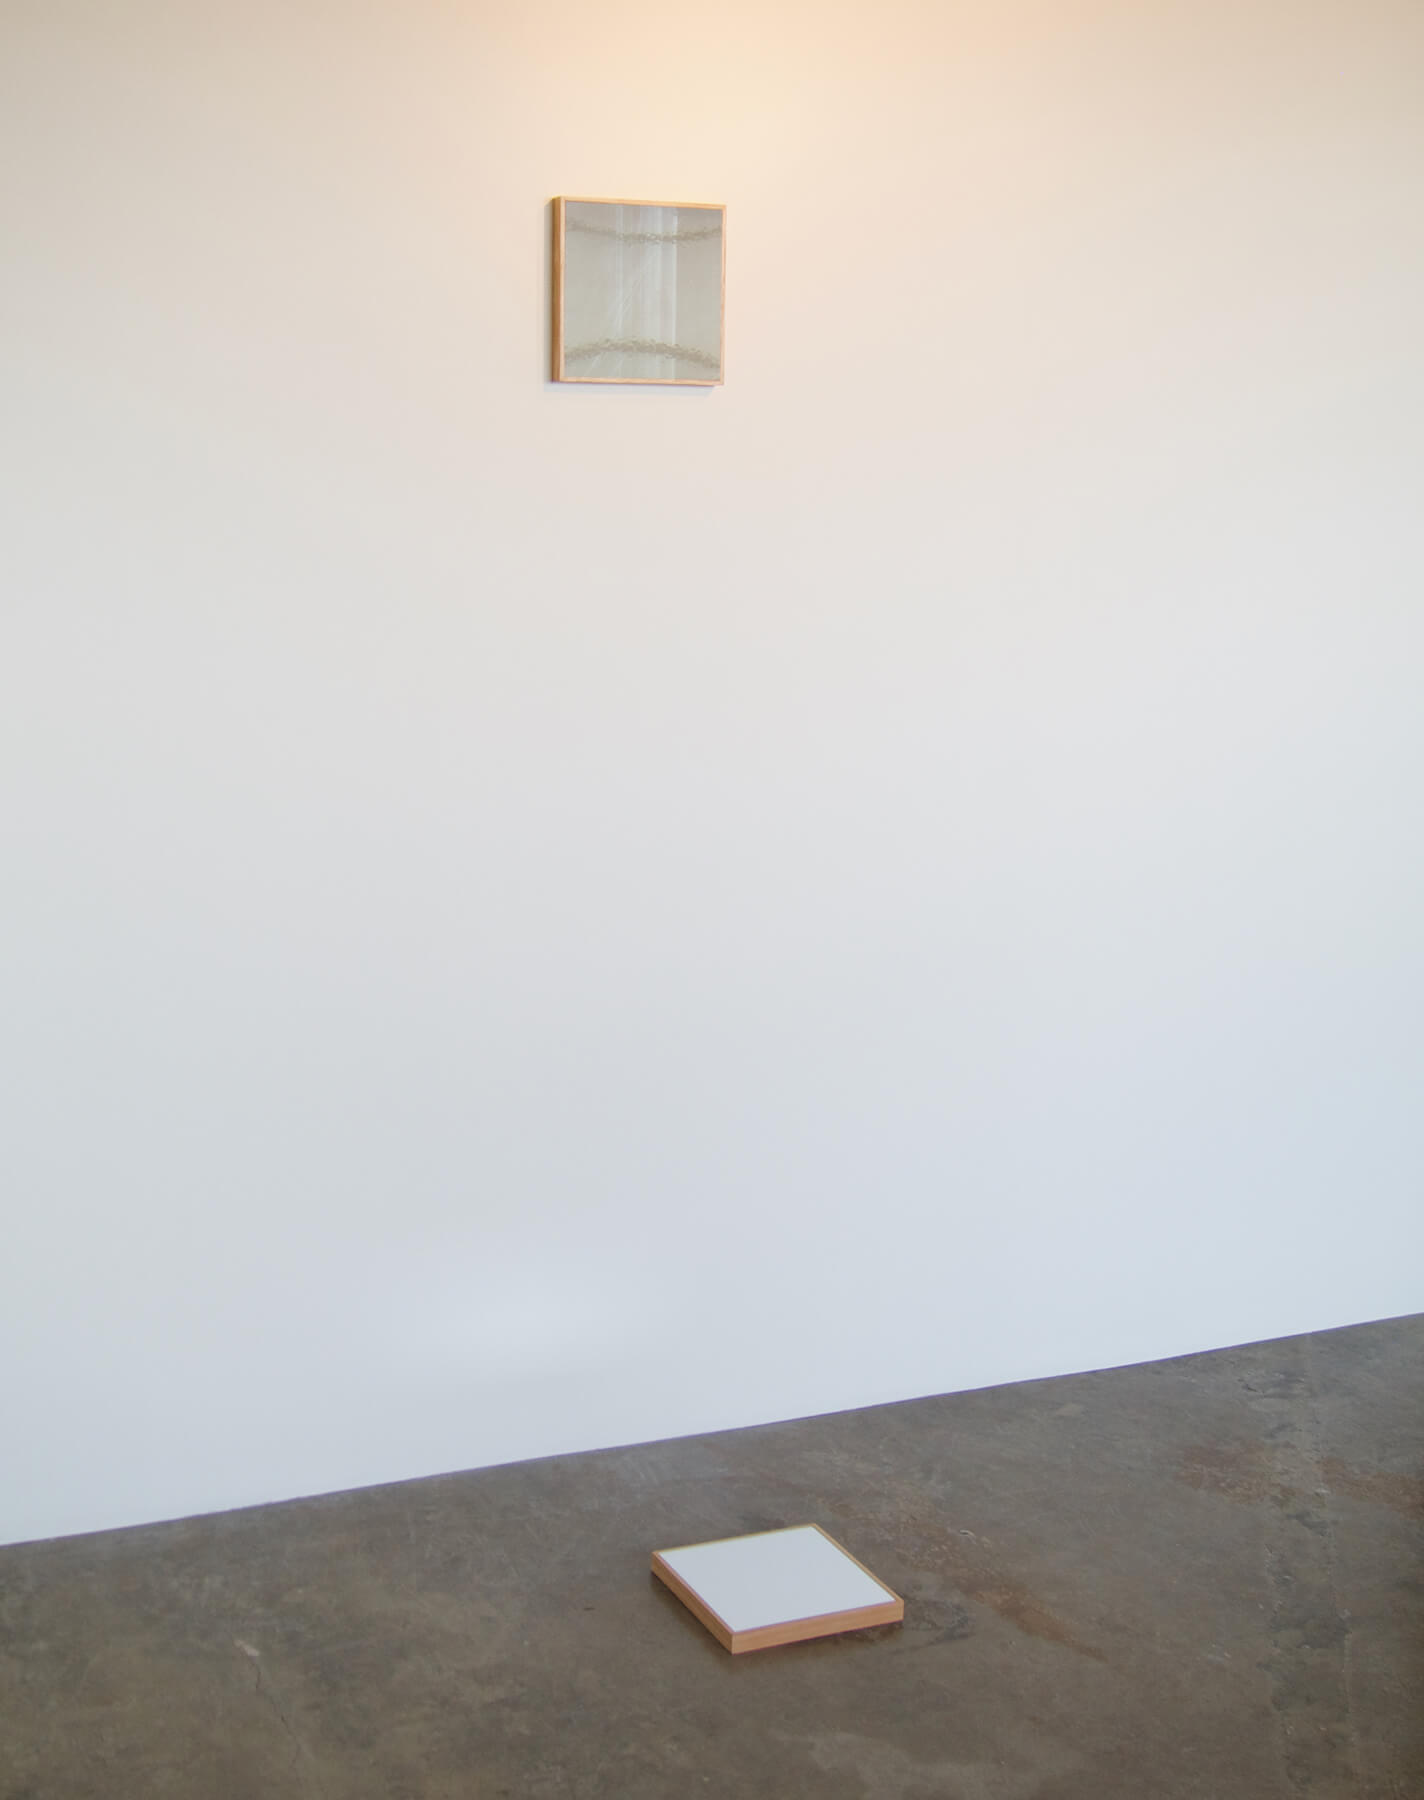 The beginning of religious feeling, Mirror, prismatic film, wood, 8 ½ in x 8 ½ in x 5 ft 7 in, 2013